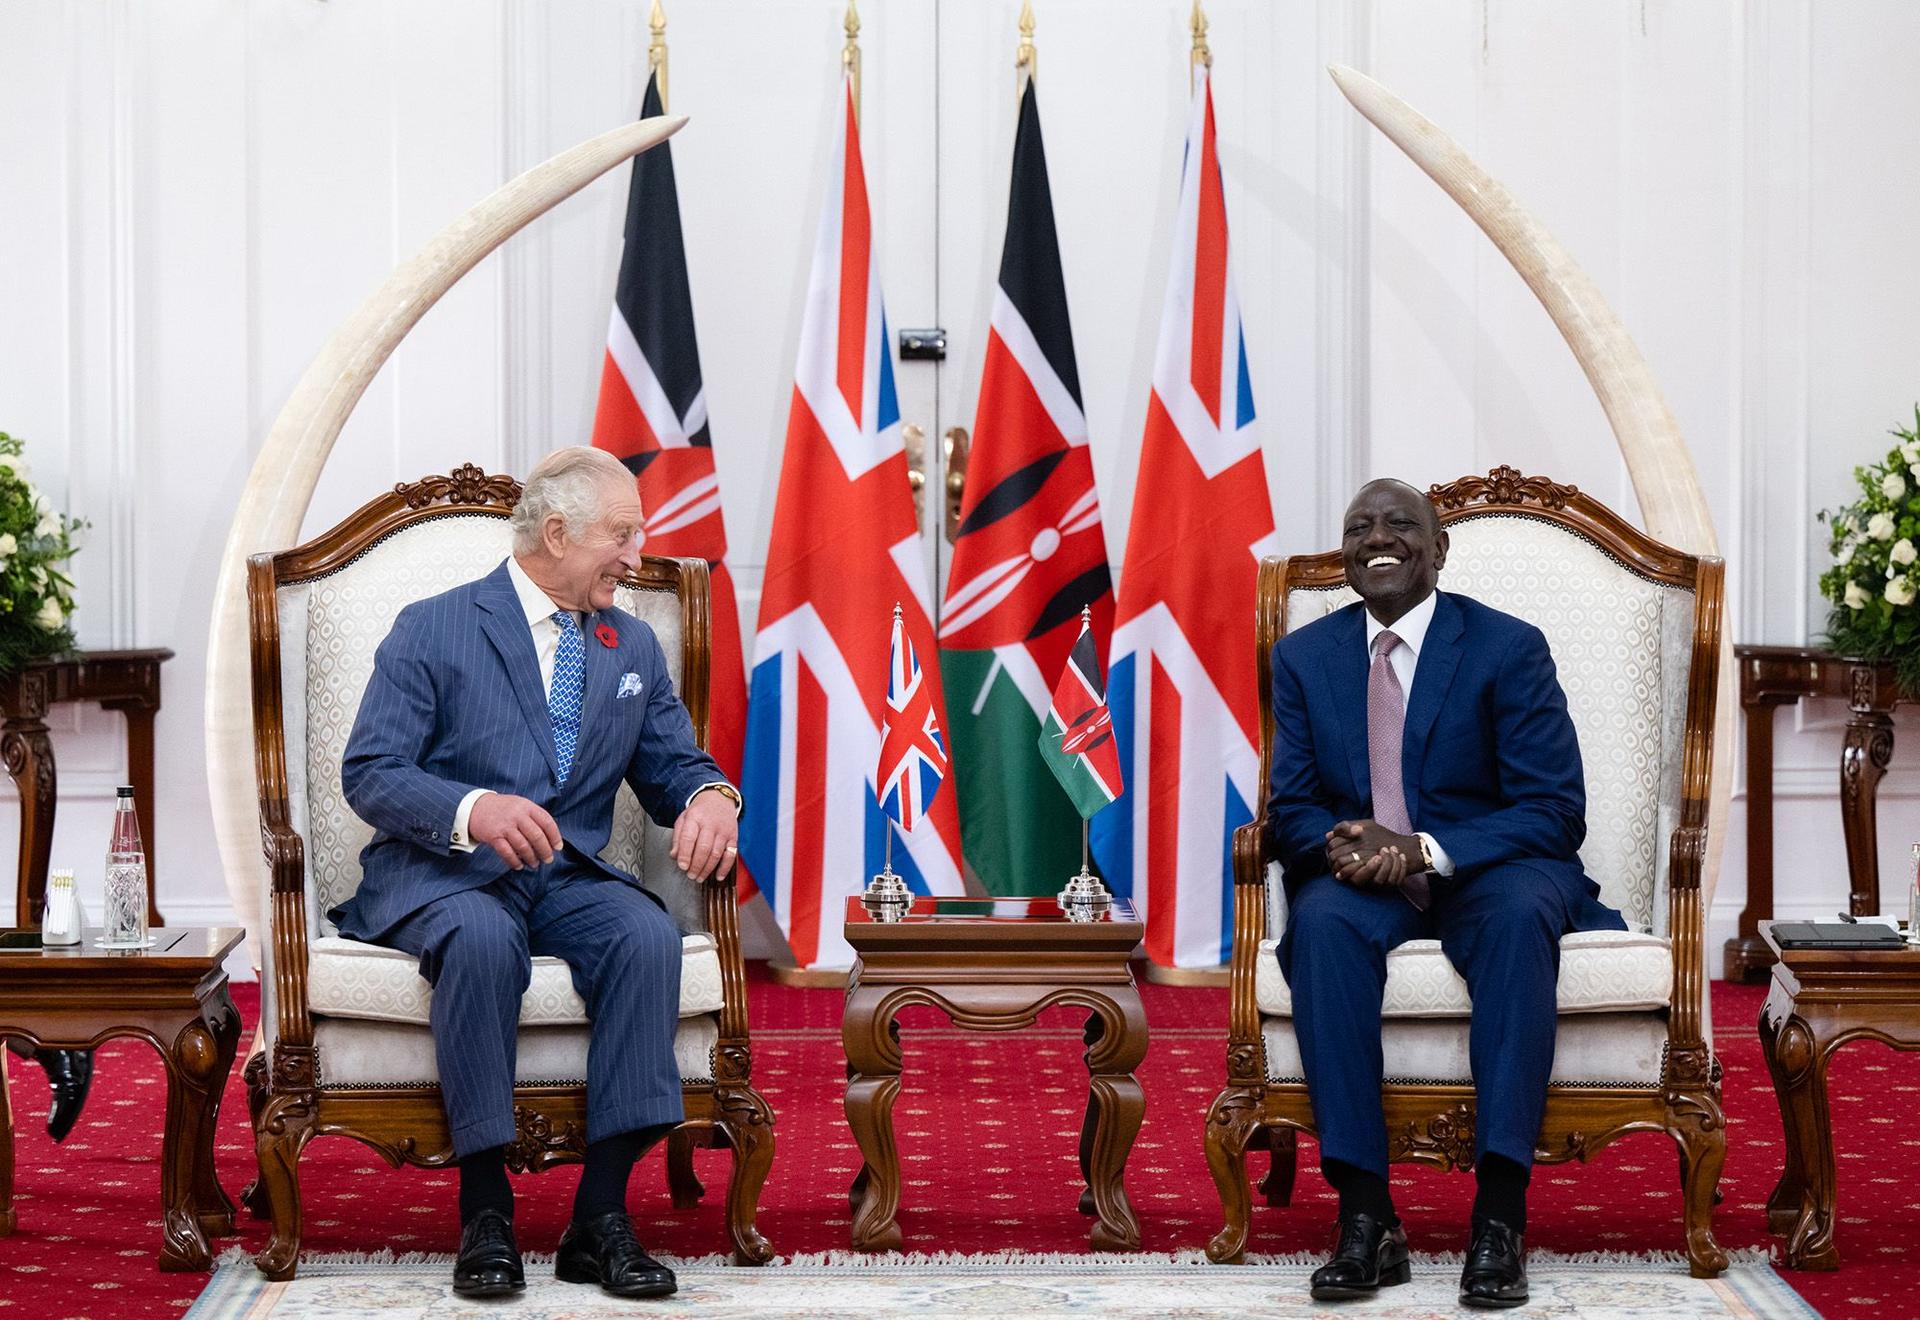 The King sat down for a bilateral meeting with Kenyan President William Ruto at Nairobi’s State House on the first day of the trip on Tuesday.